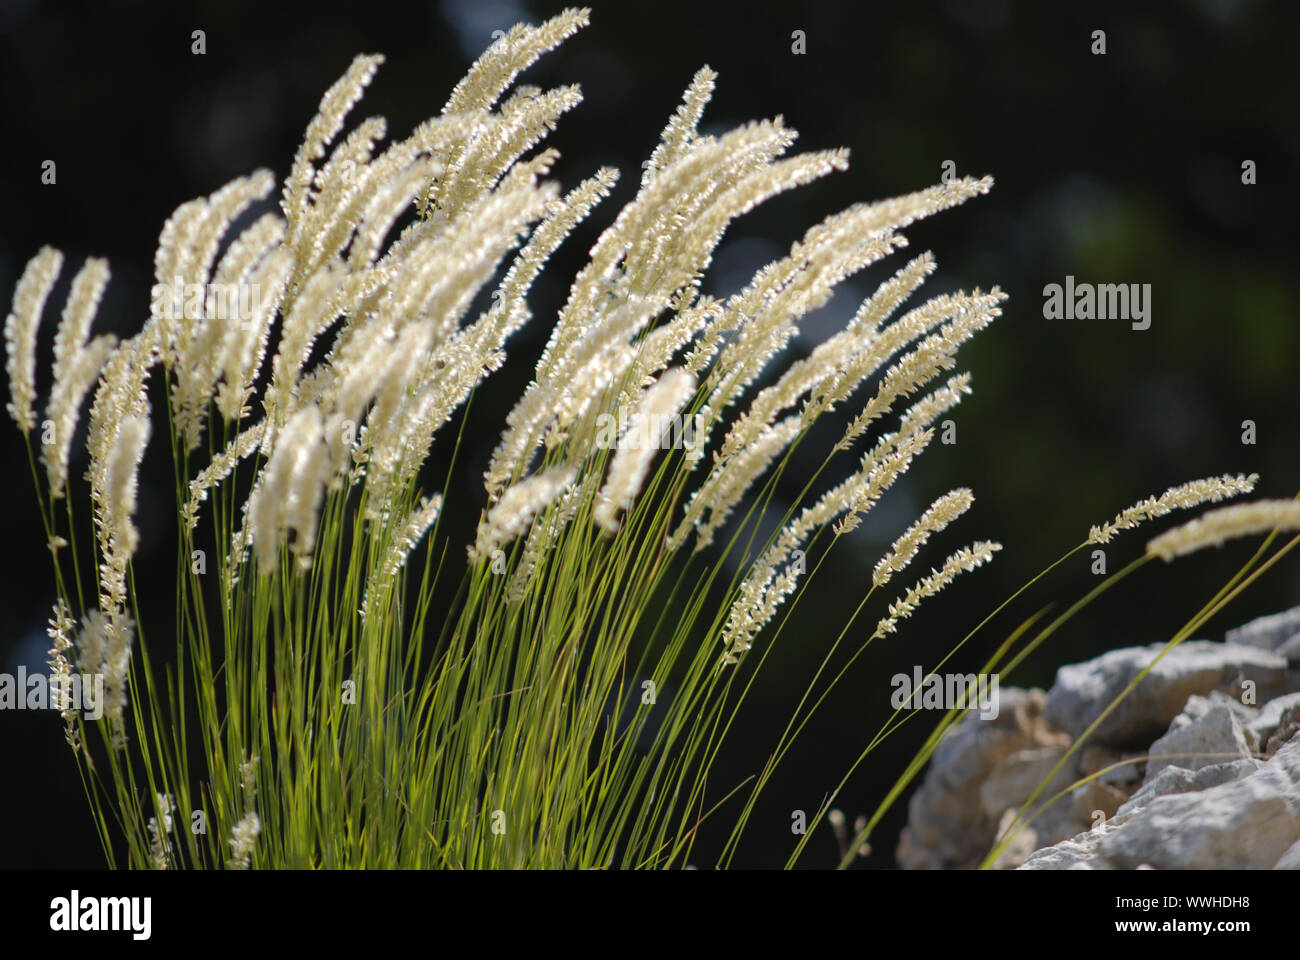 Foxtail grass in the back light Stock Photo